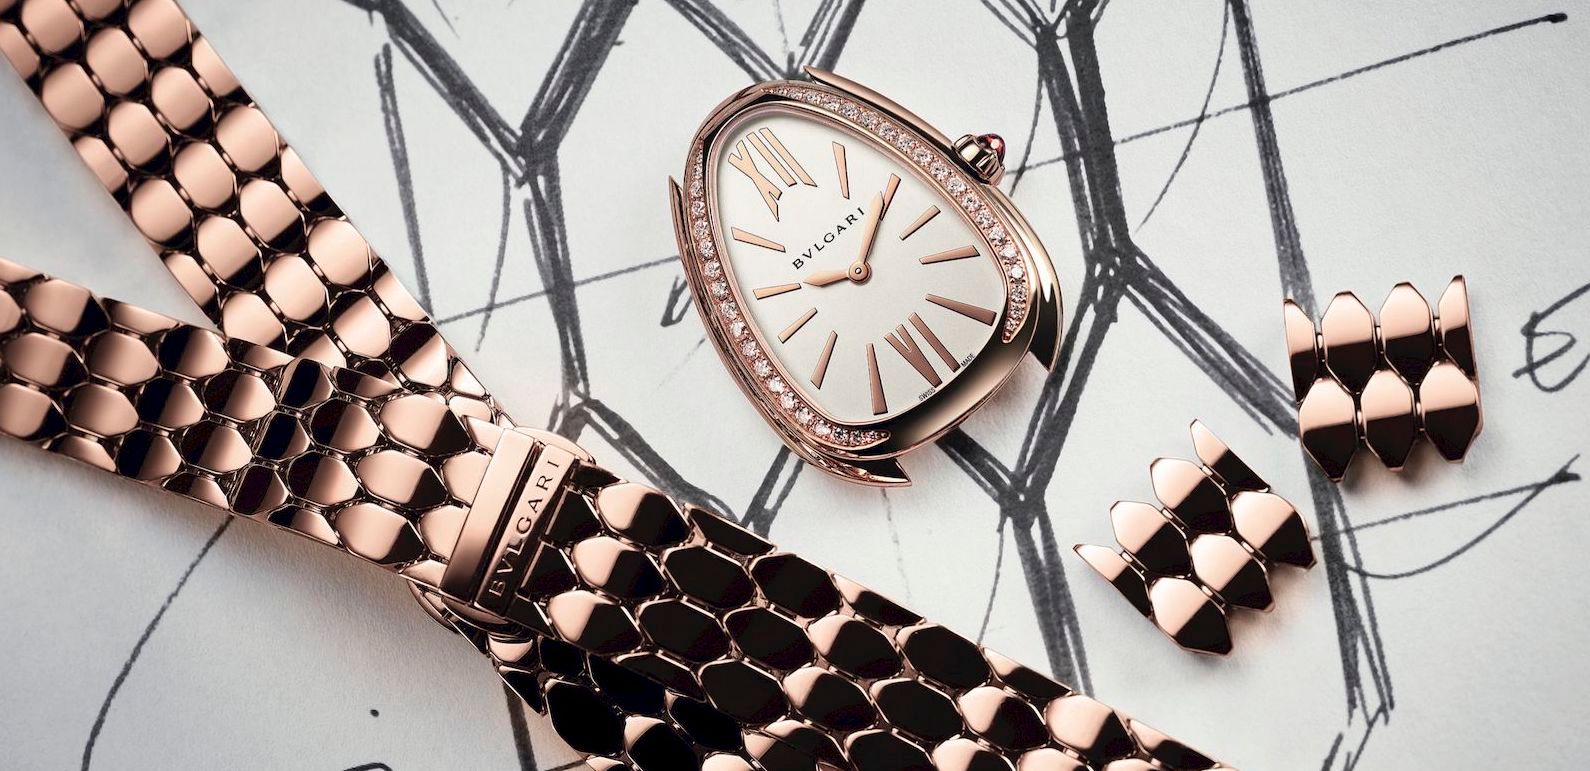 The serpent takes different forms in Bvlgari’s jewellery watches under the Serpenti line